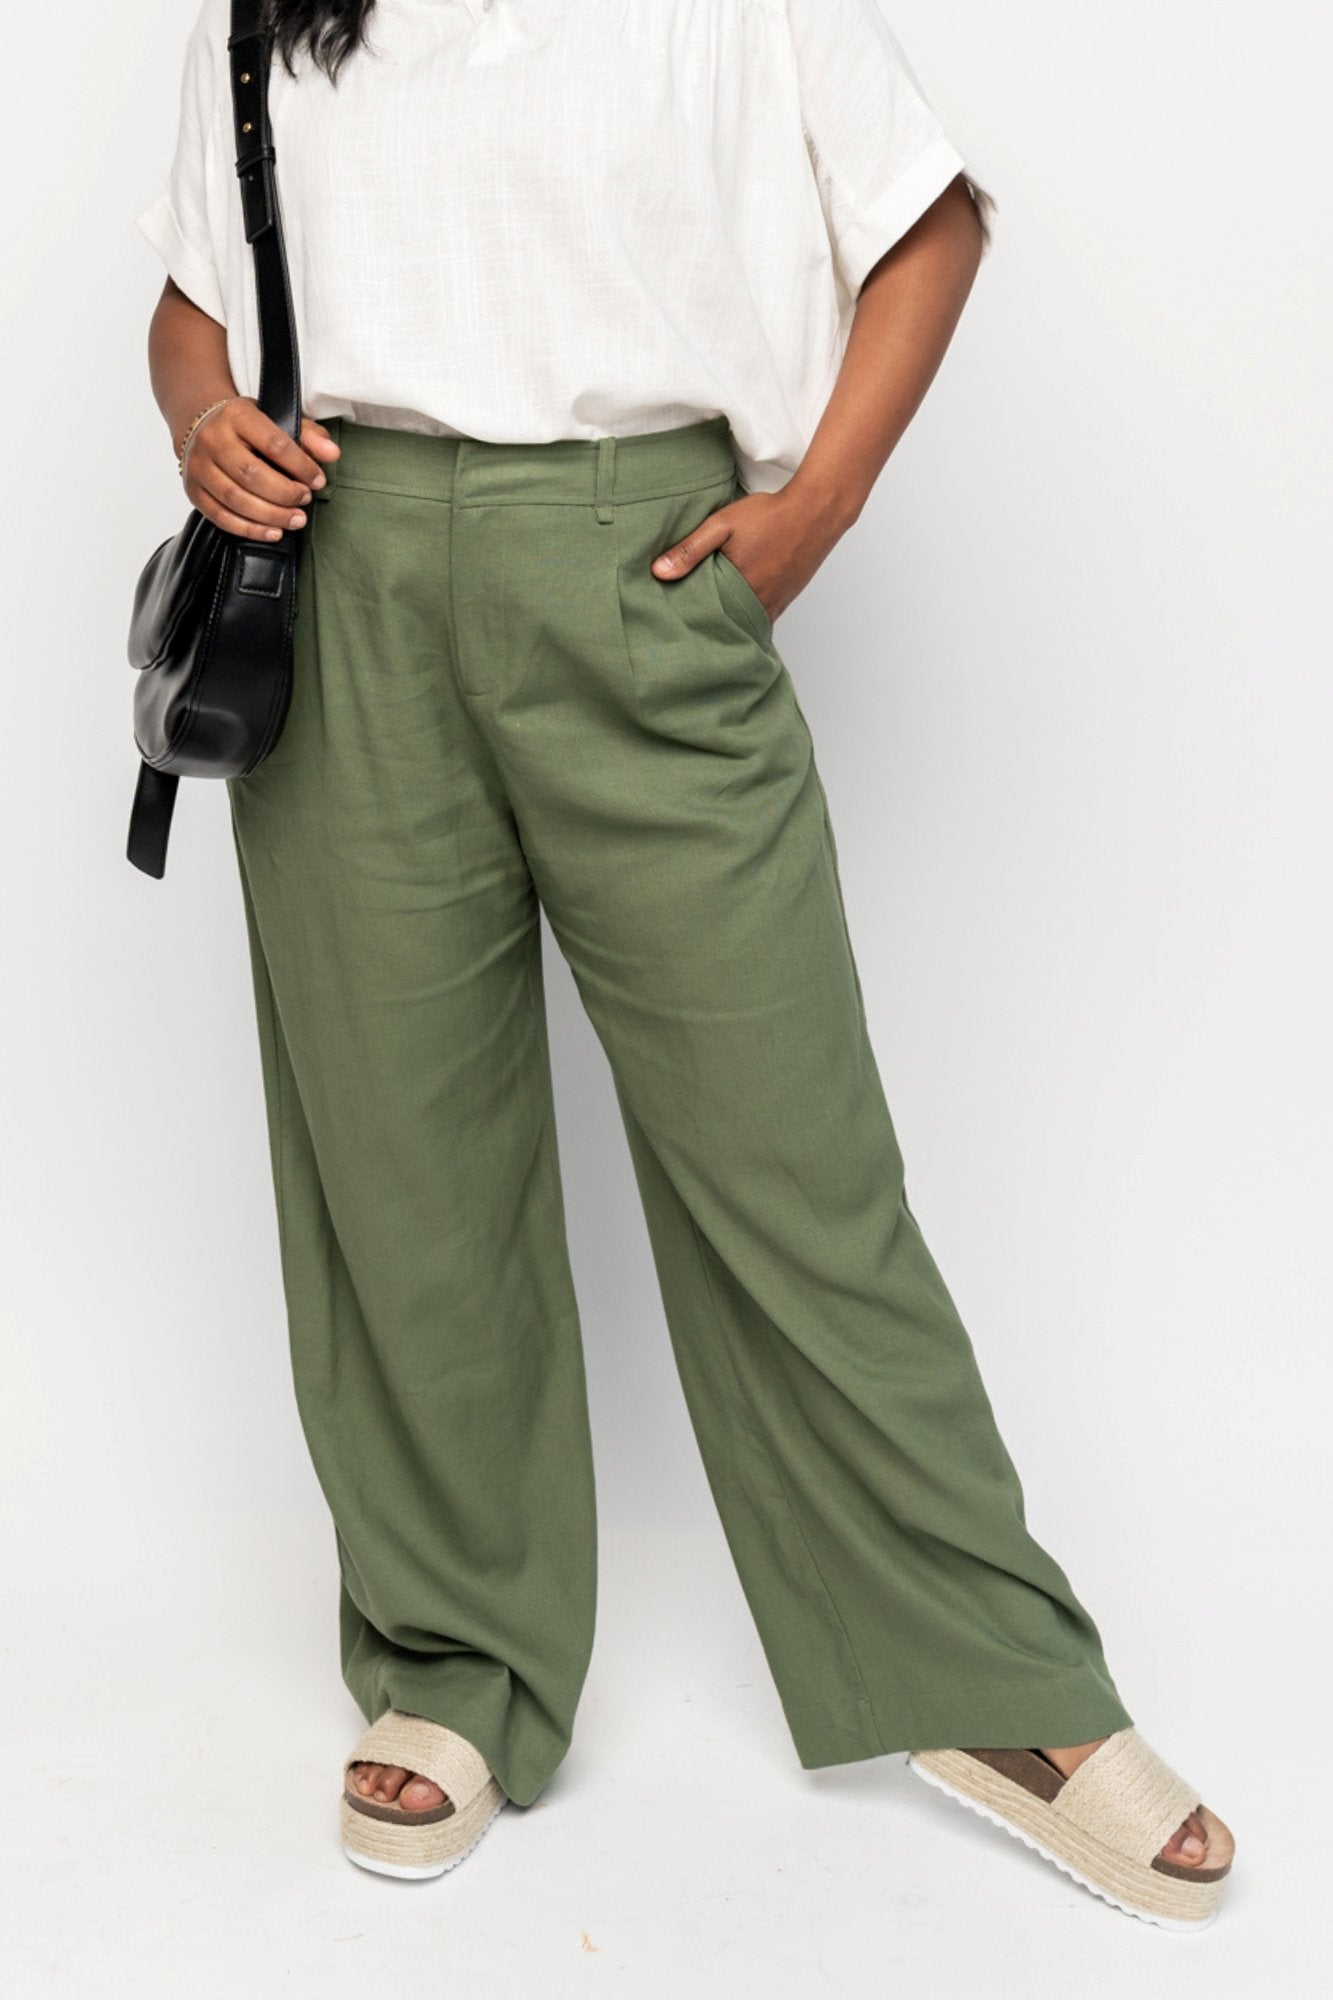 Bridger Pant in Olive (Small-XL) Holley Girl 